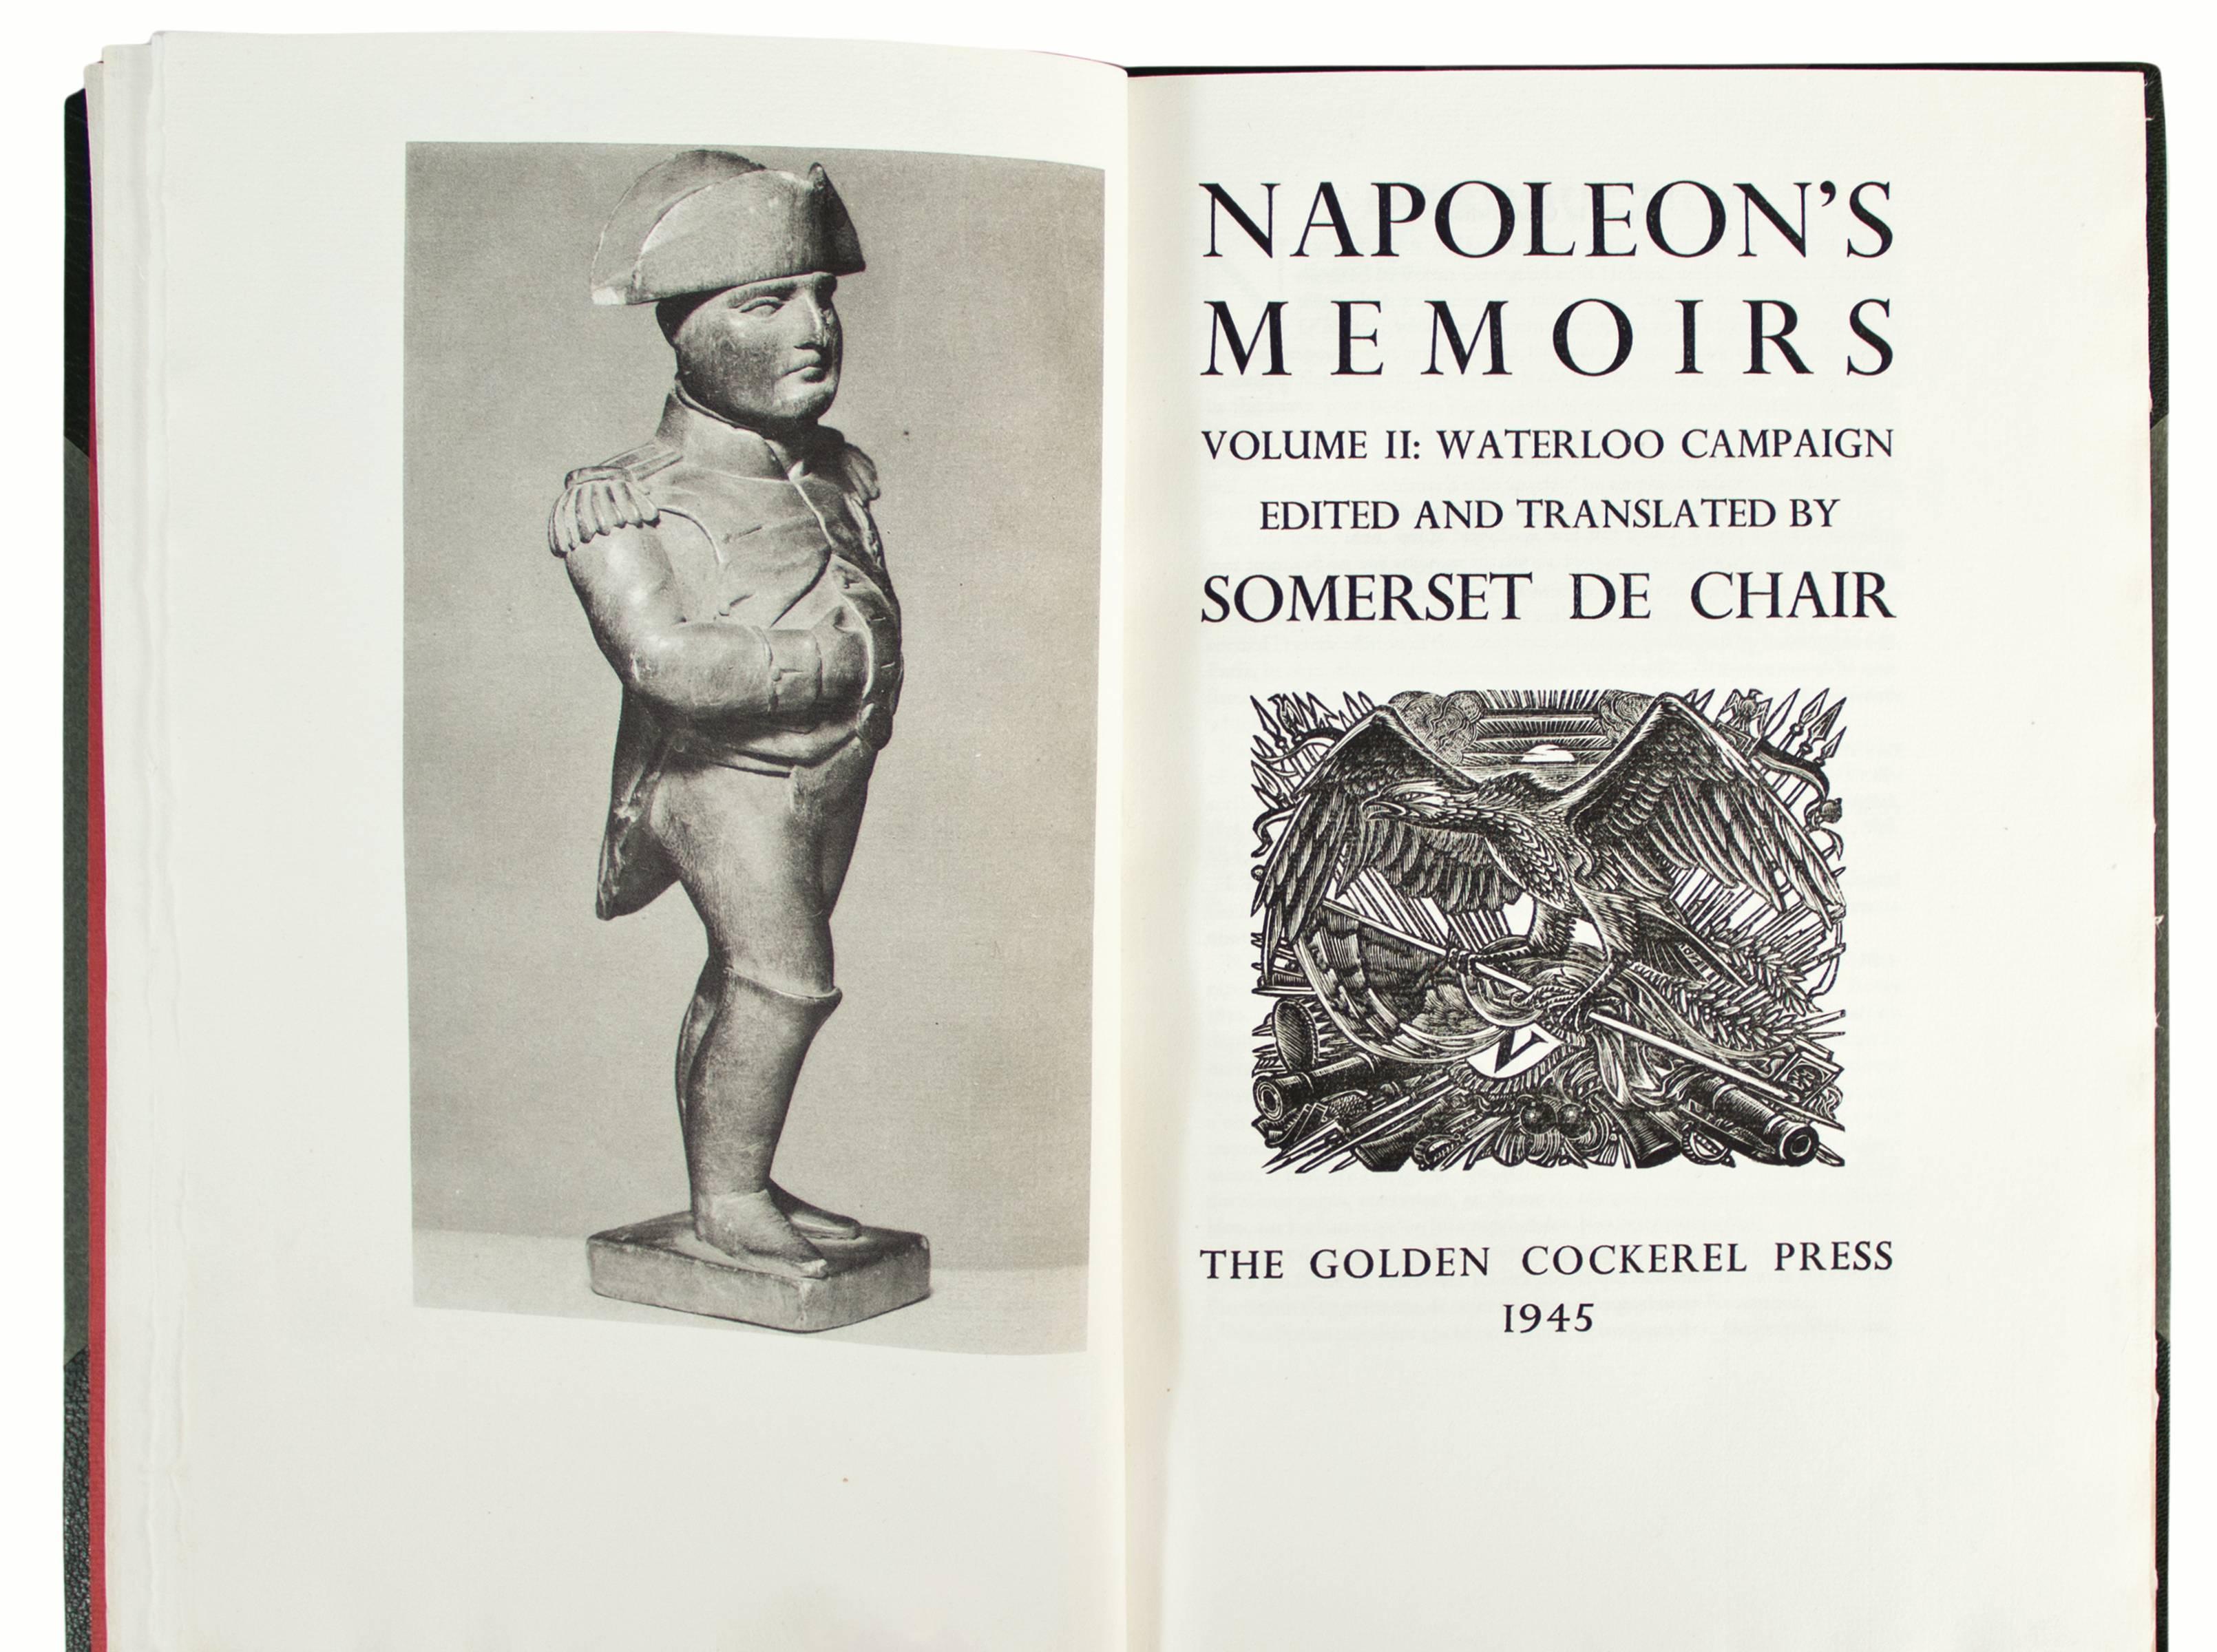 Edited by Somerset de Chair. Two volumes. 422, [2]; 78, [2] pp.  Folio, elegantly bound in recent 3/4 dark green morocco.  London: The Golden Cockerel Press, 1945. 

A magnificent set of this beautifully printed edition limited to 500 copies. The